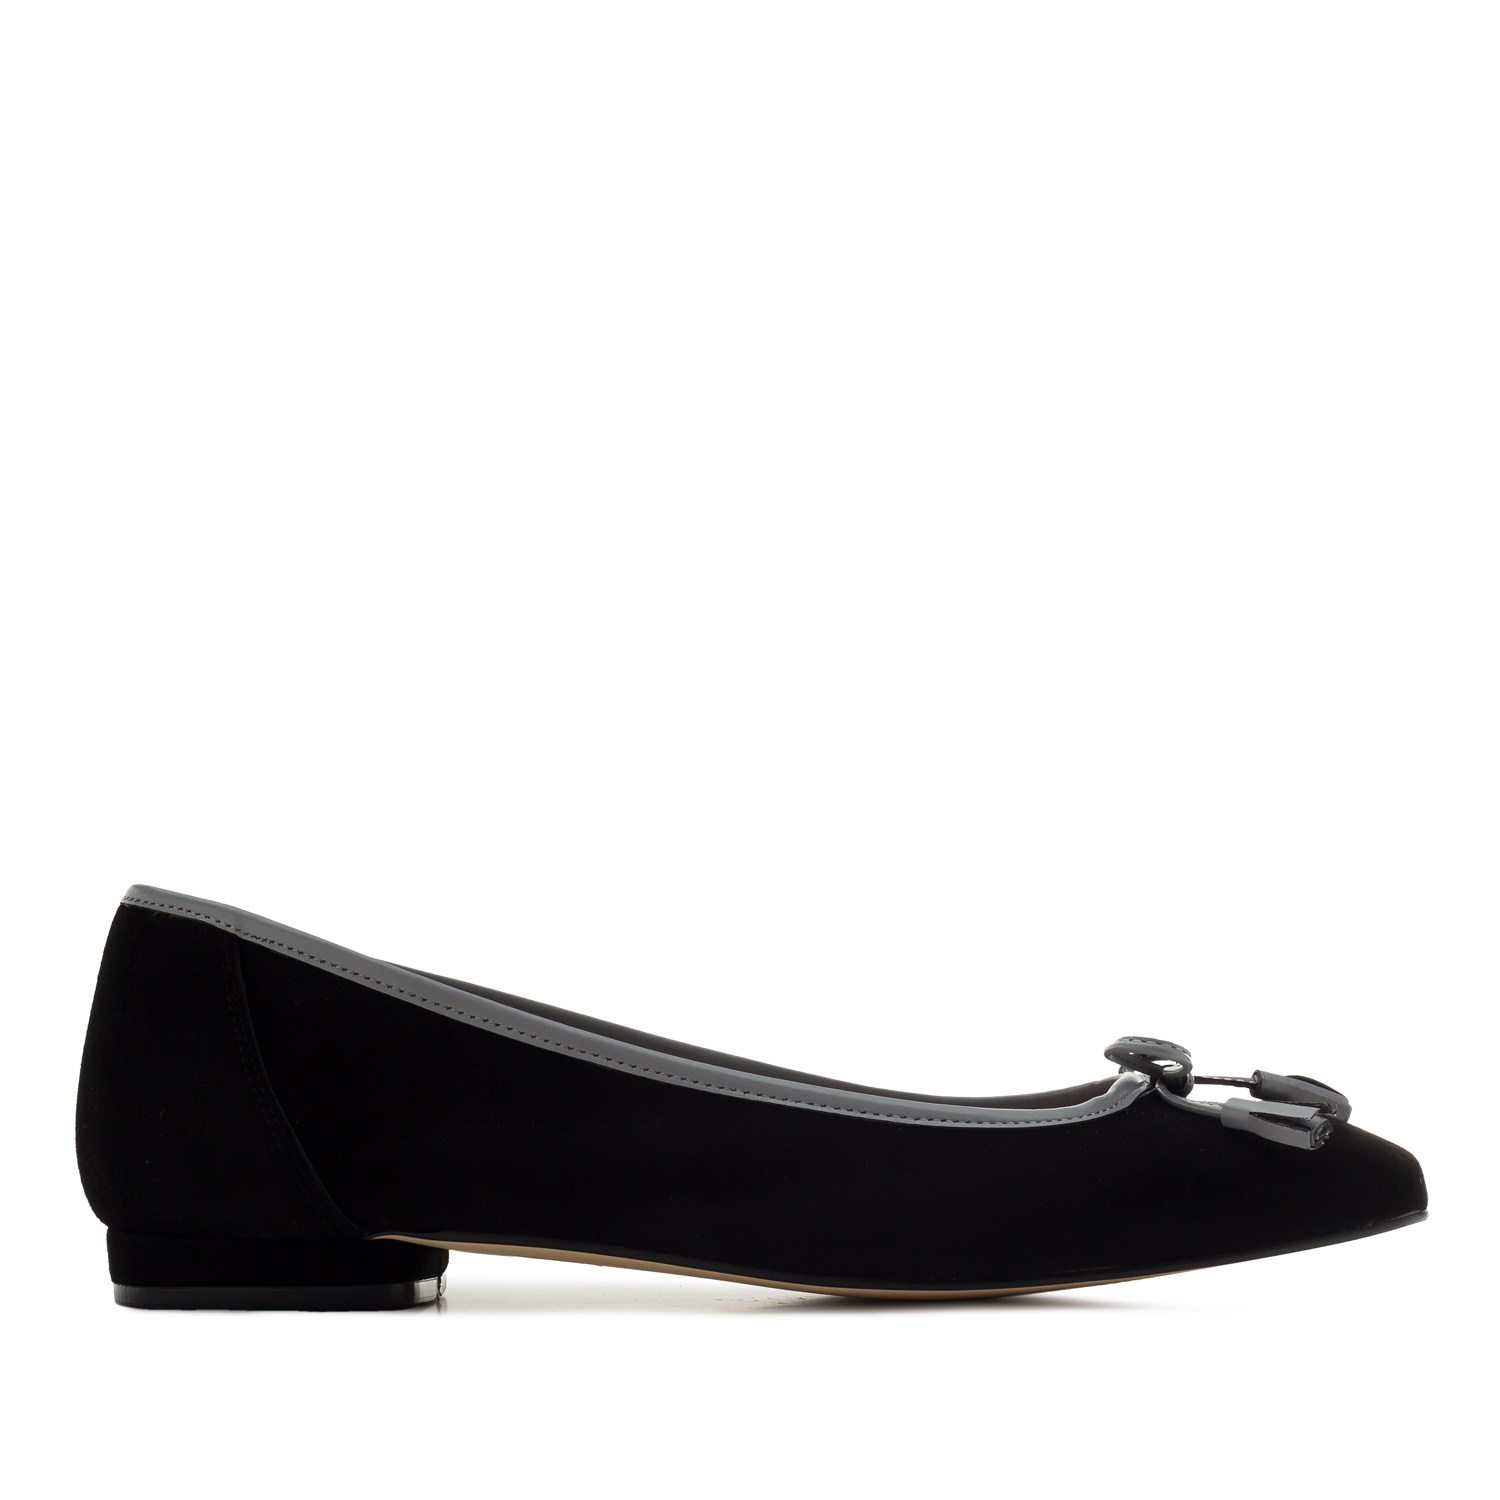 Bow Ballet Flats in Black Suede Leather 